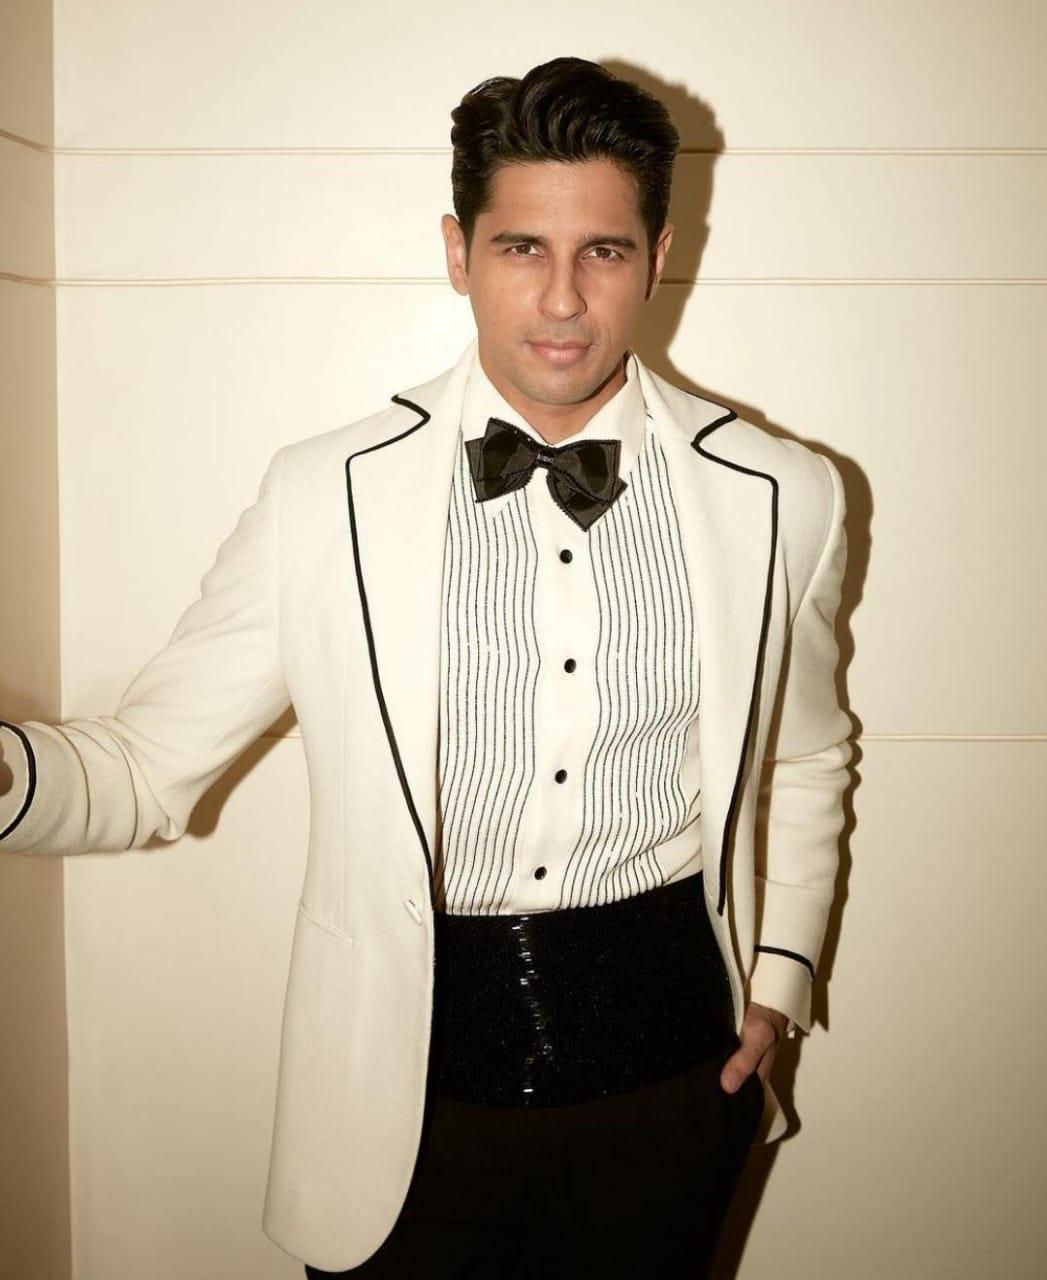 Sidharth Malhotra exudes timeless sophistication in his fashion choices. Whether it's a classic suit or a casual outfit, Malhotra's style is marked by refined elegance. His ability to effortlessly switch between traditional and modern looks makes him a style icon for every occasion.